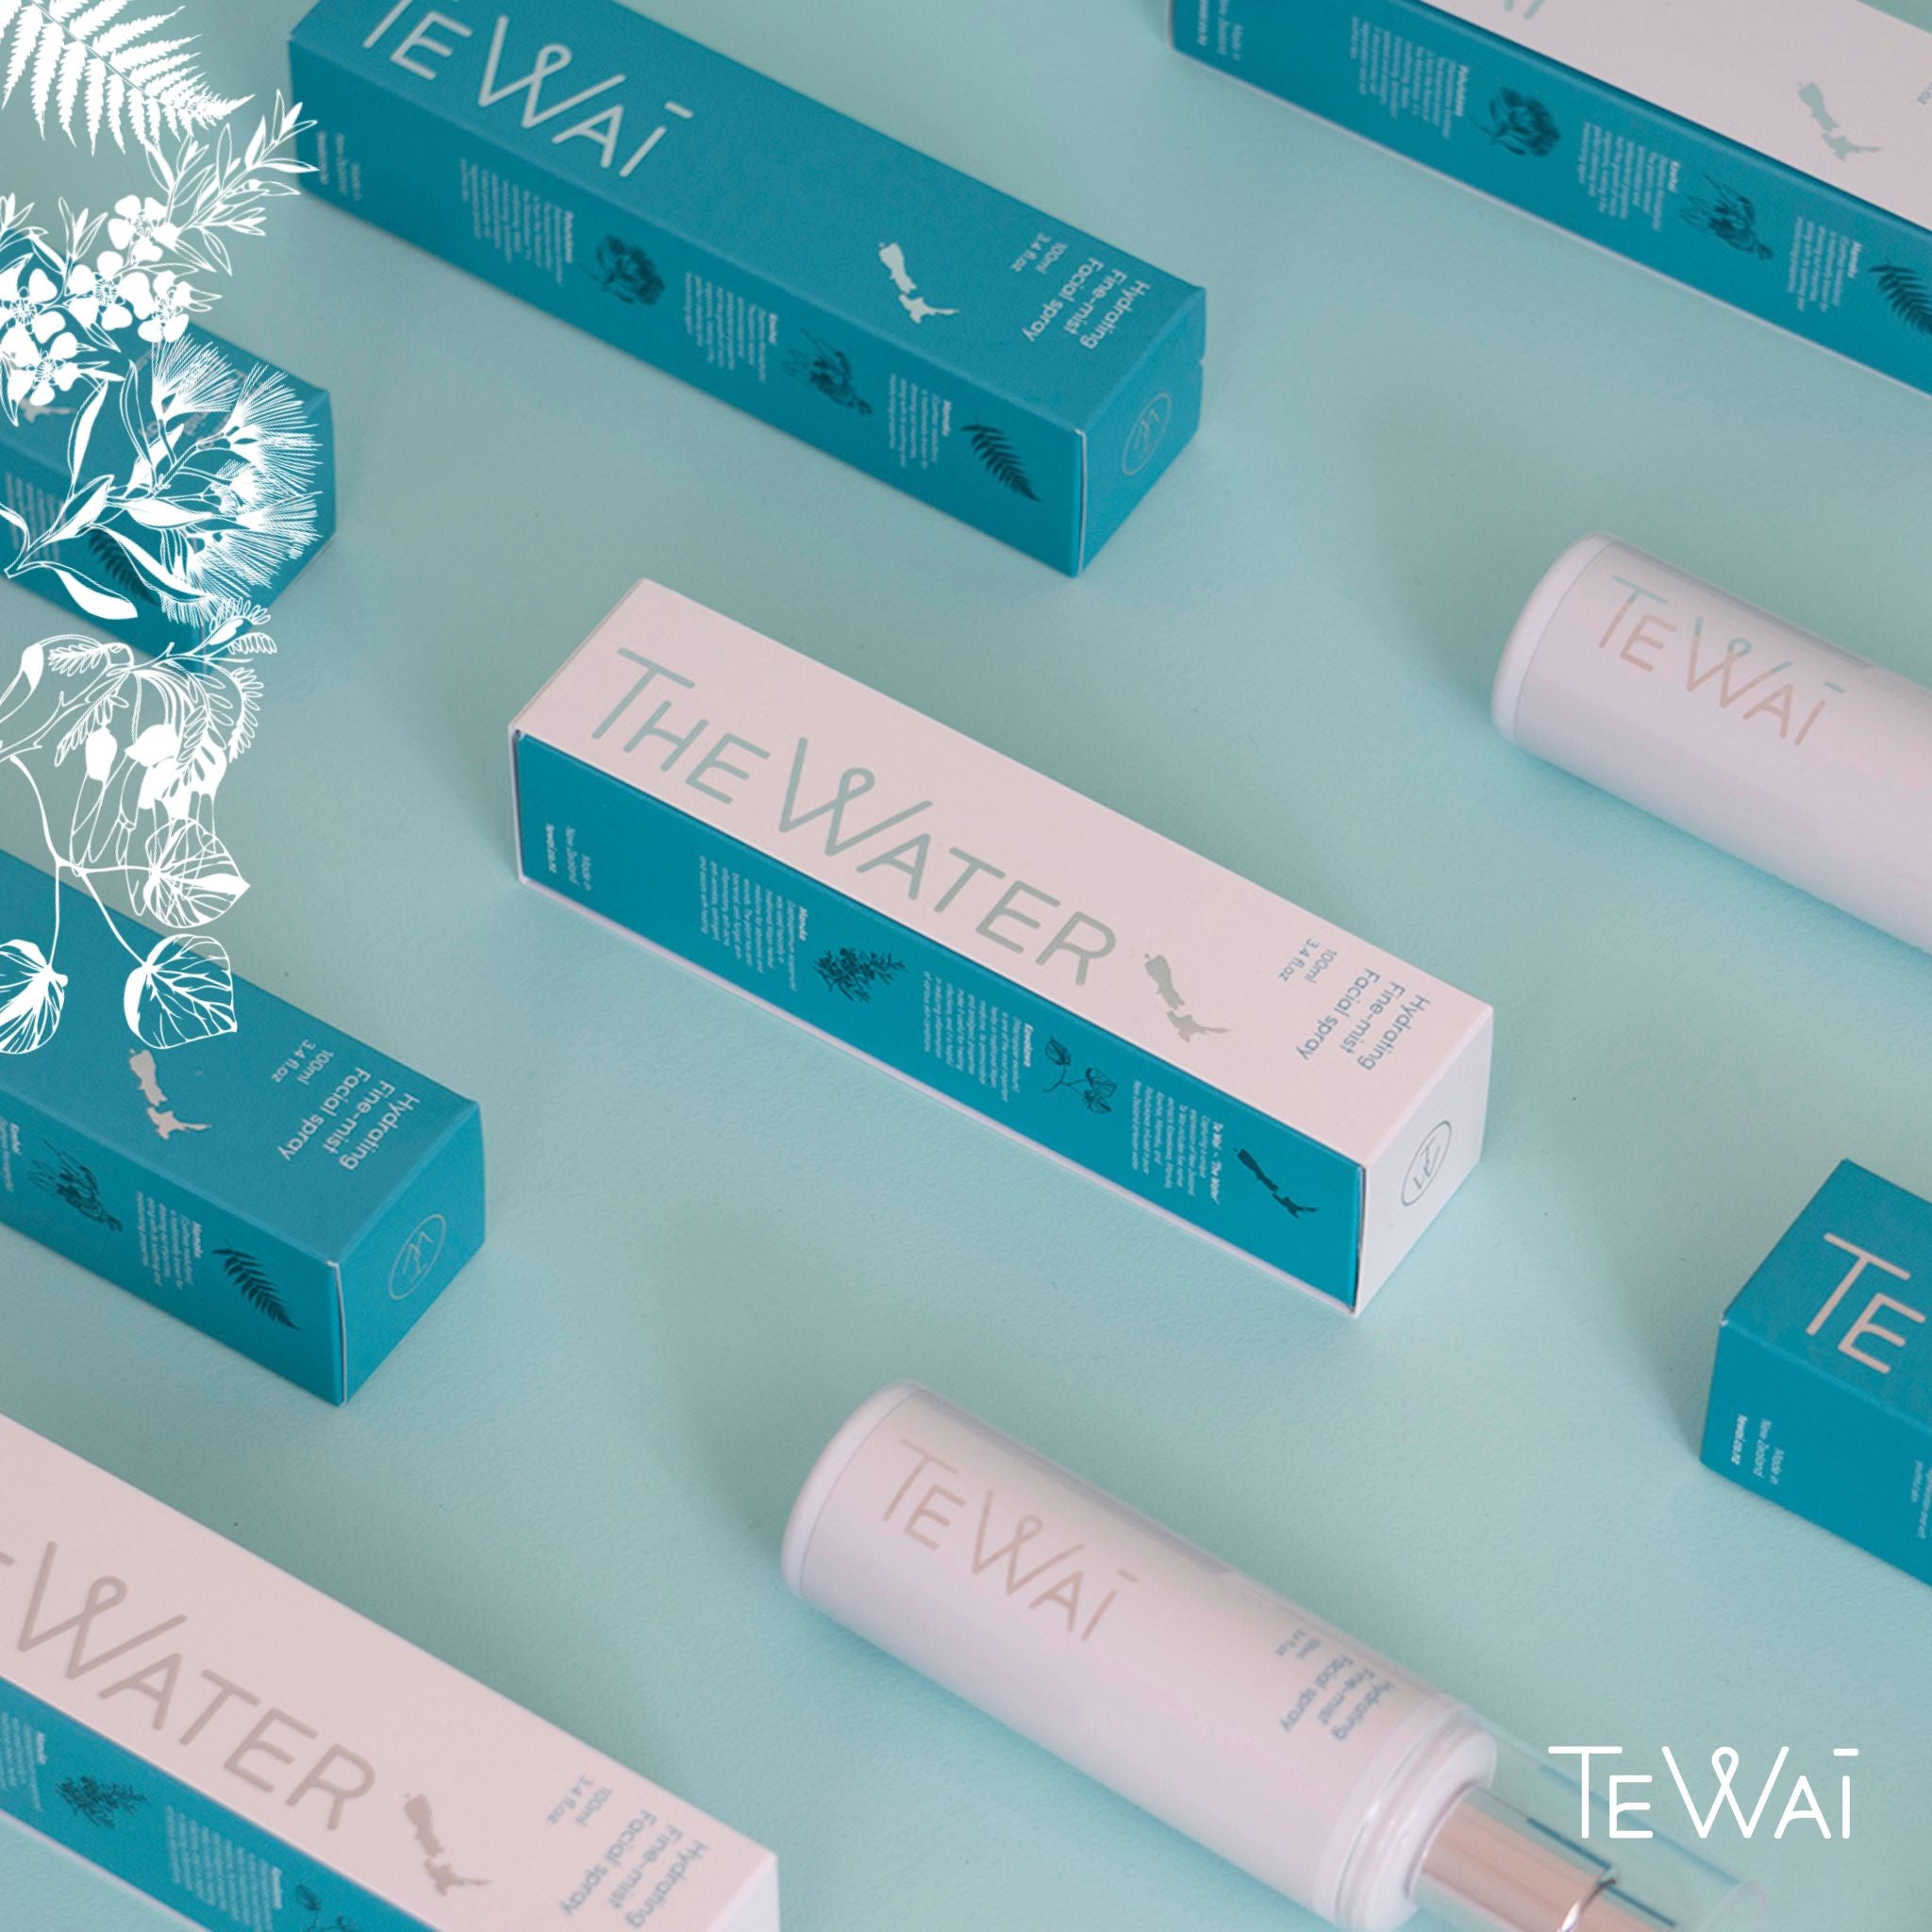 Te Wai ~ ‘The Water’ captures a unique expression of New Zealand. Featuring five native botanicals Kawakawa, Manuka, Kowhai, Mamaku, and Pohutukawa infused in pure New Zealand water.  This hydration rich, skin nourishing mist refreshes tired-looking skin 